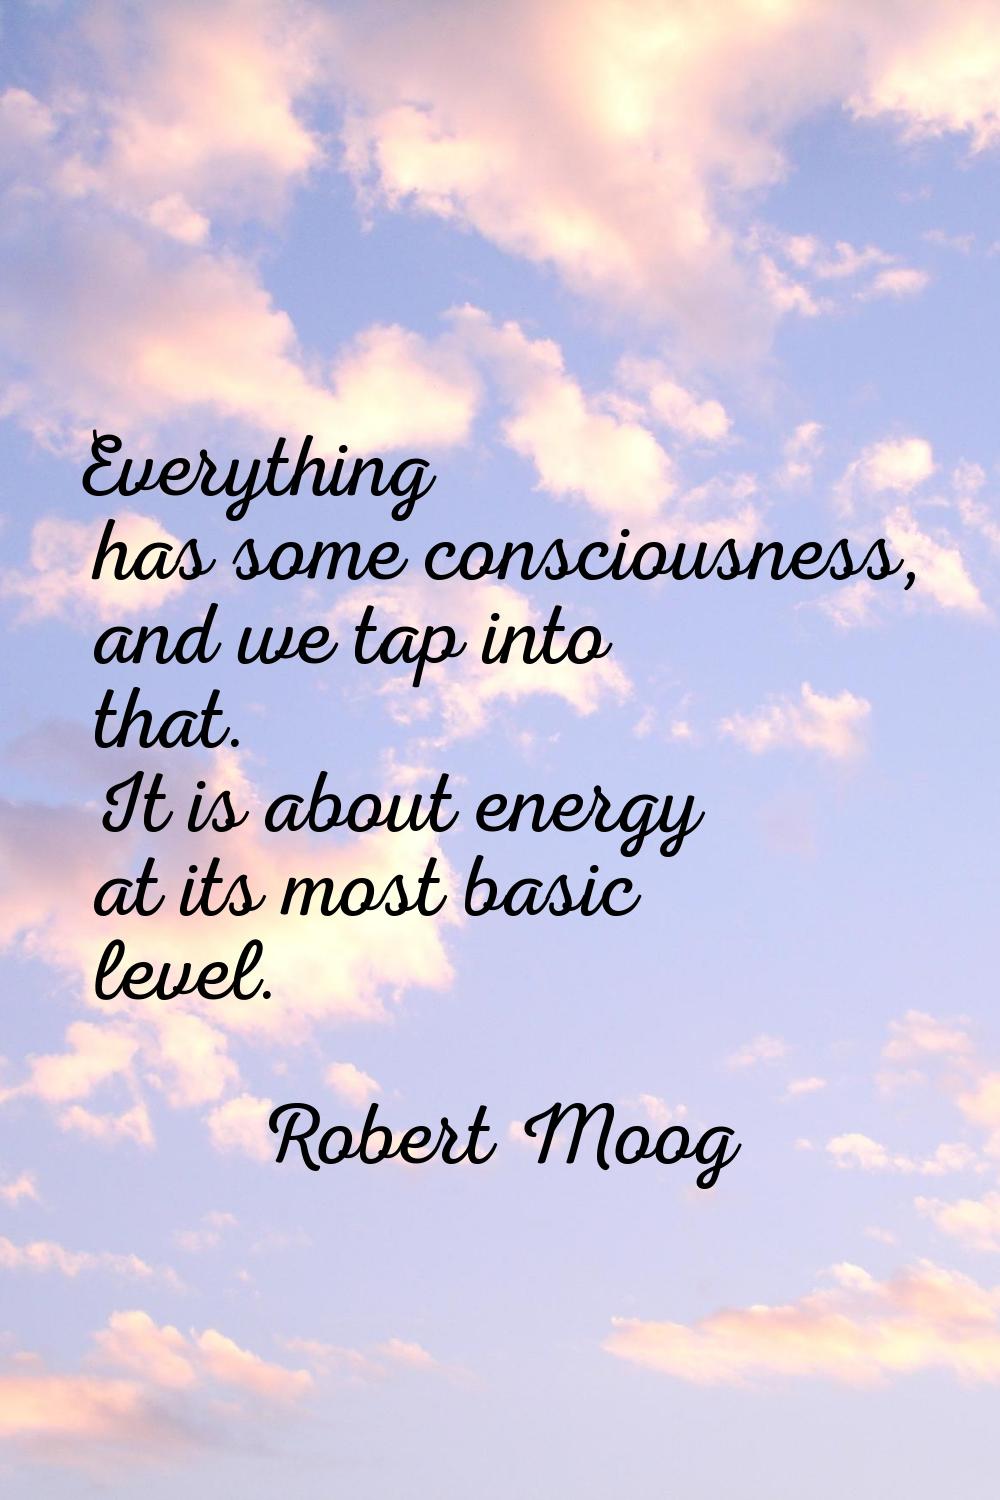 Everything has some consciousness, and we tap into that. It is about energy at its most basic level